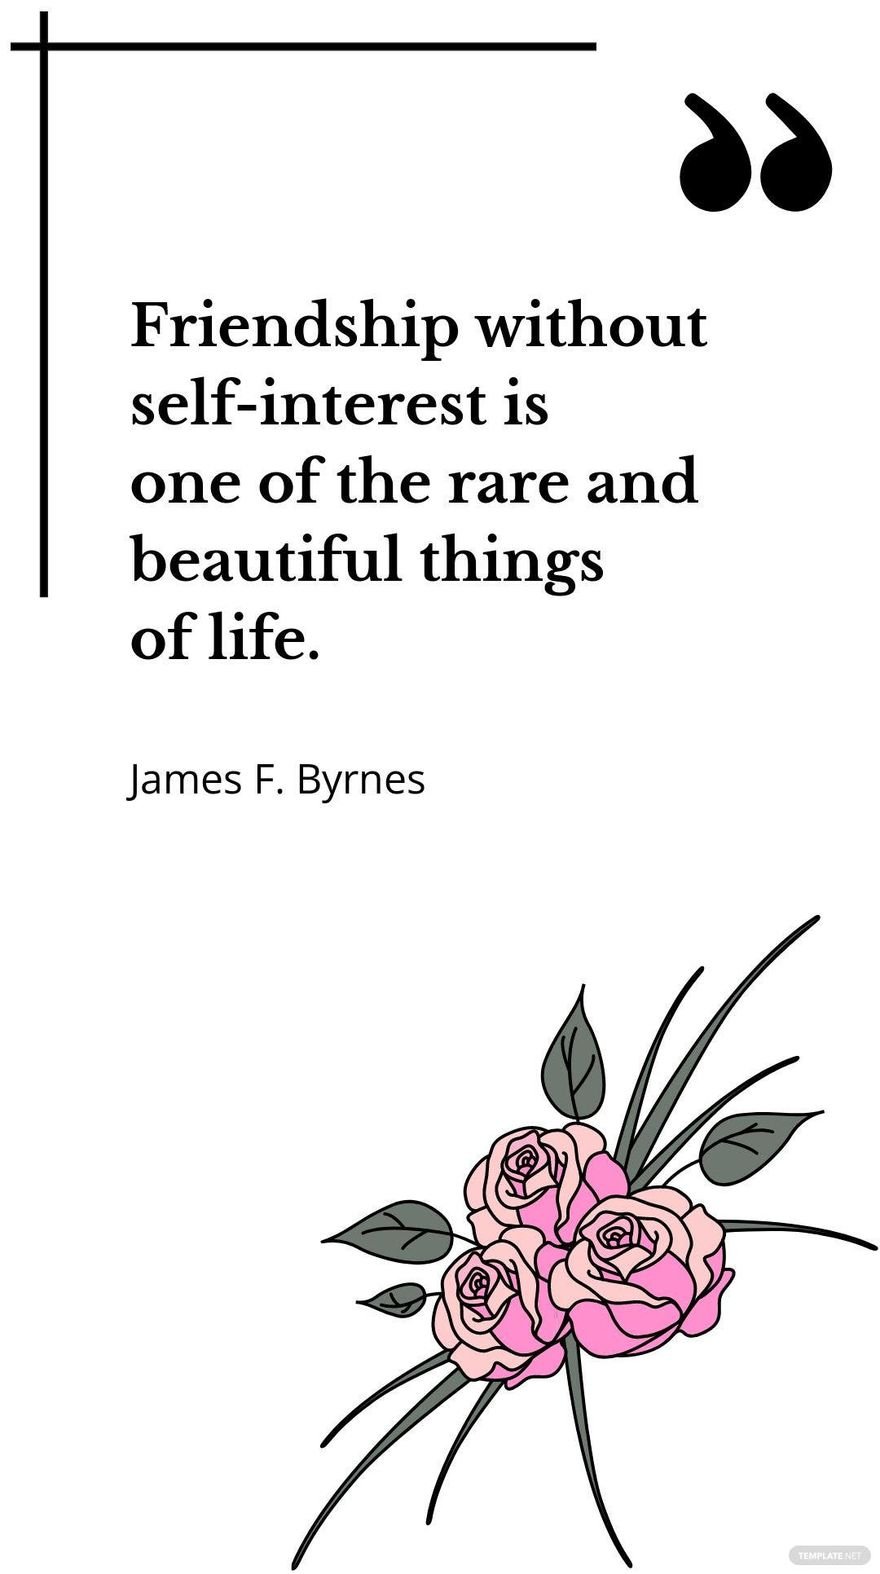 James F. Byrnes - Friendship without self-interest is one of the rare and beautiful things of life.